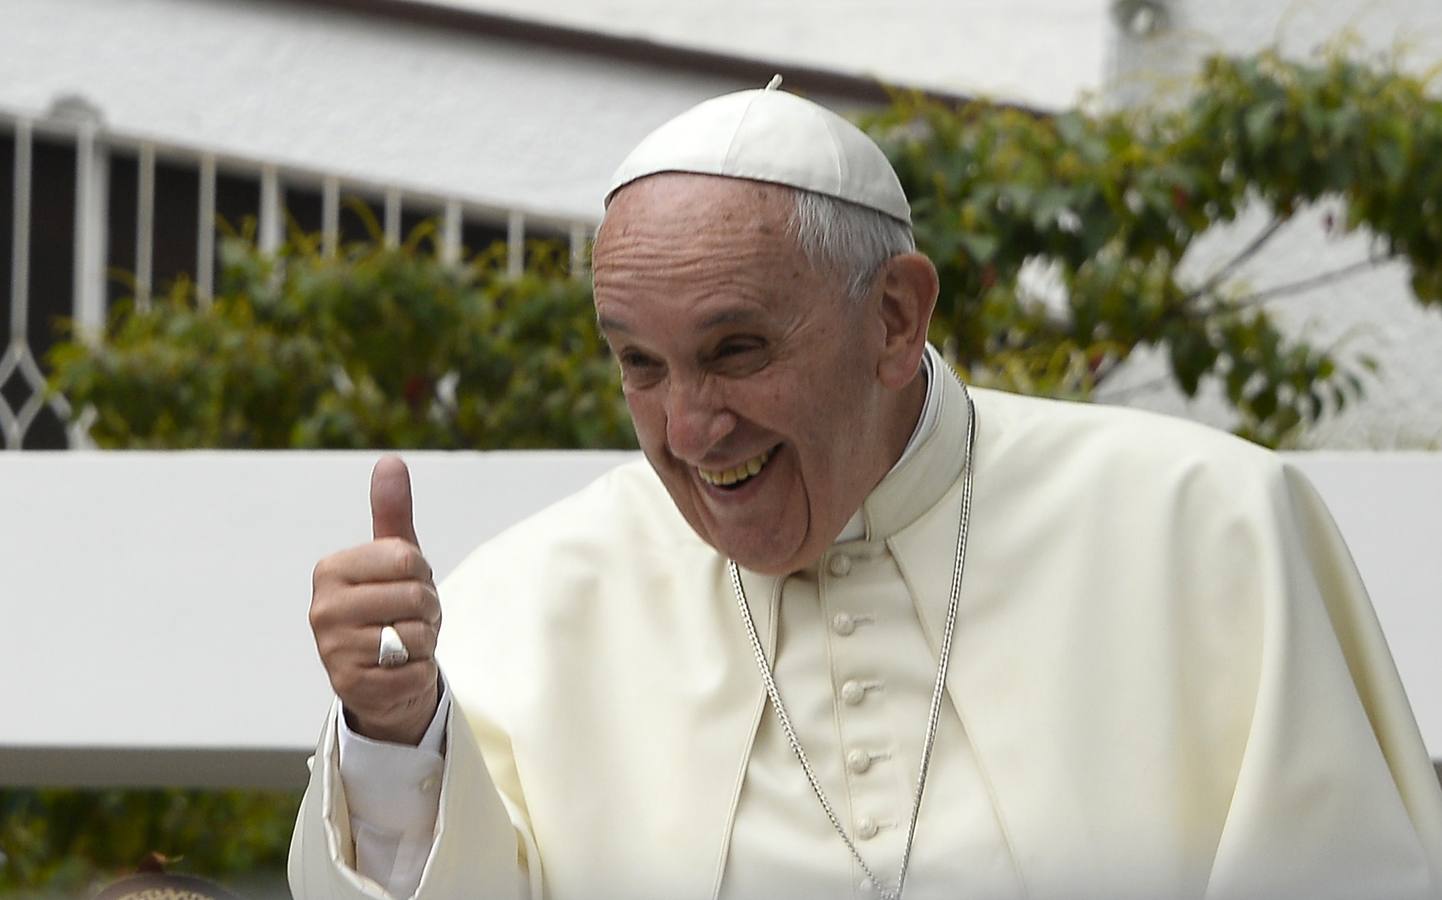 Pope Francis gives his thumb up from the popemobile in Quito, on July 7, 2015. Pope Francis celebrated his second open air mass in Ecuador and has called for greater "dialogue" and "participation without exclusion". AFP PHOTO / JUAN CEVALLOS